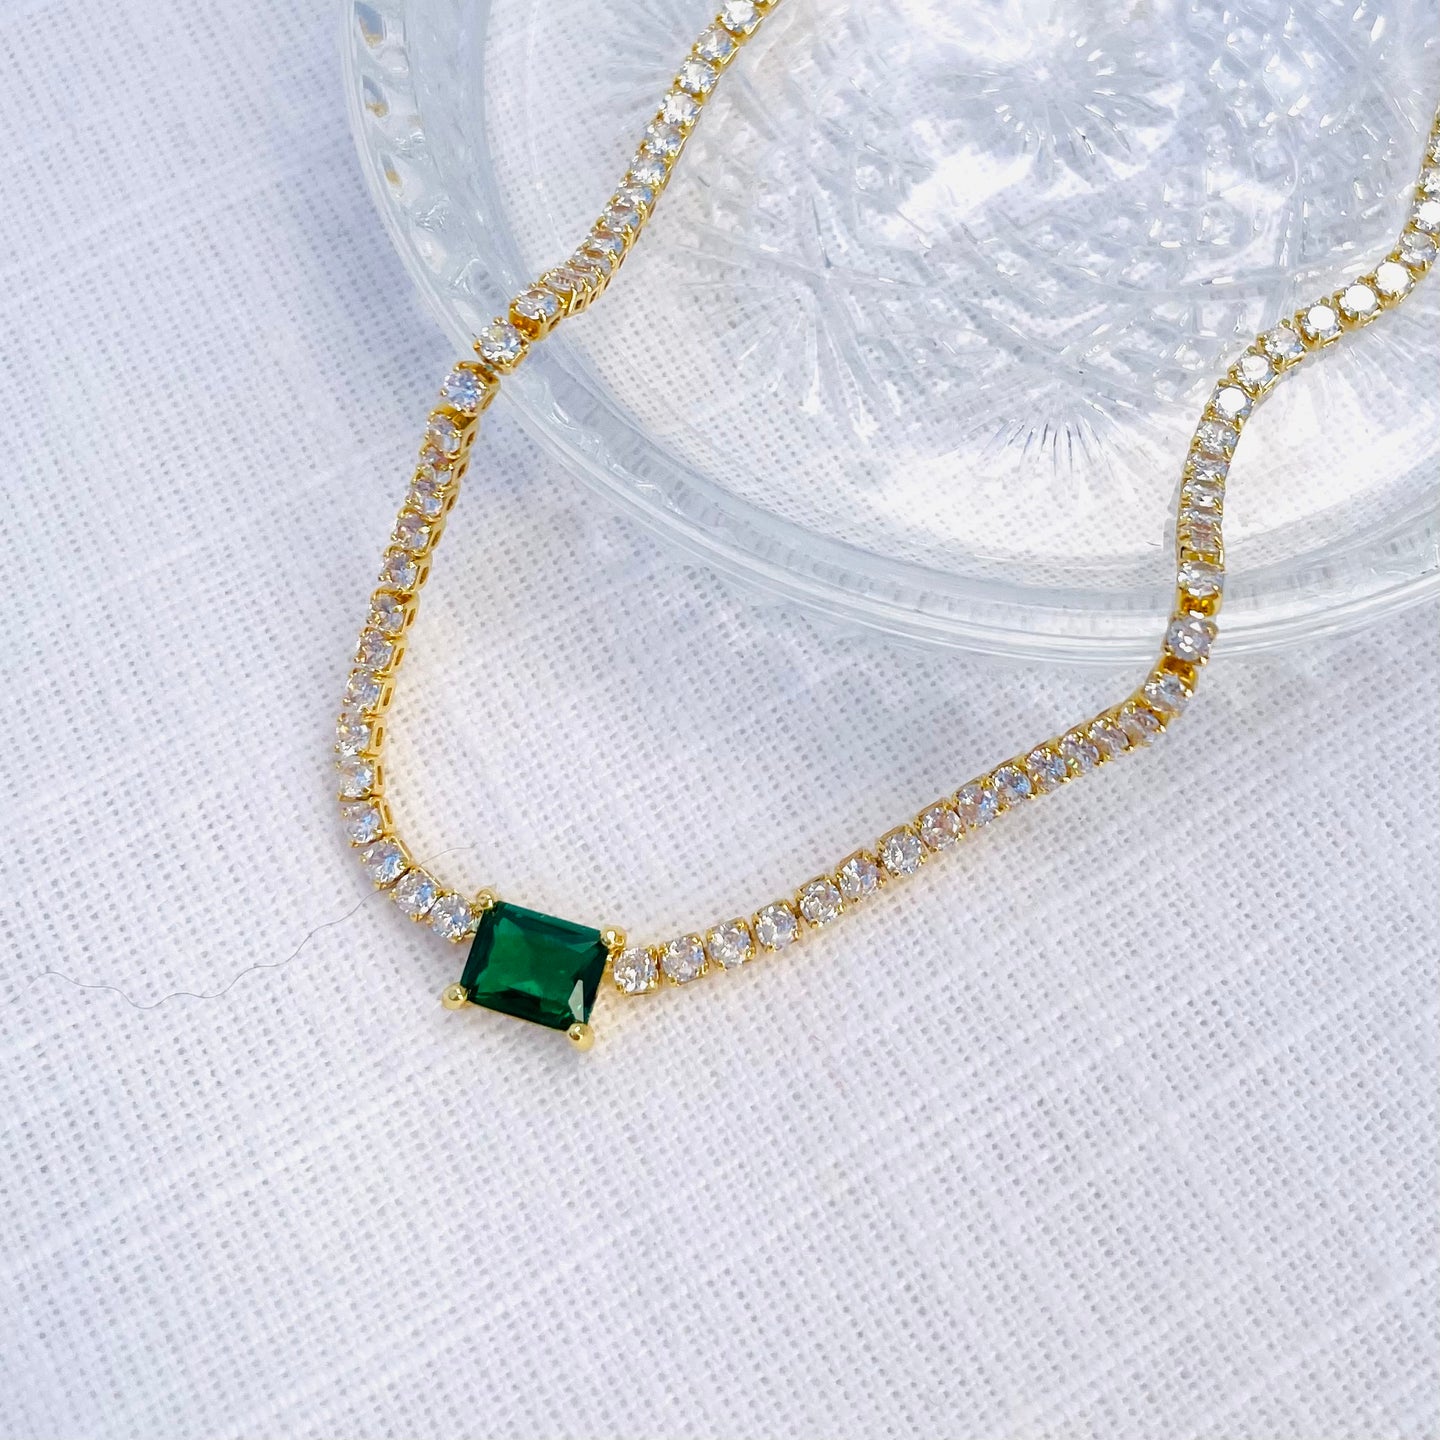 Tennis Necklace with Emerald Crystal